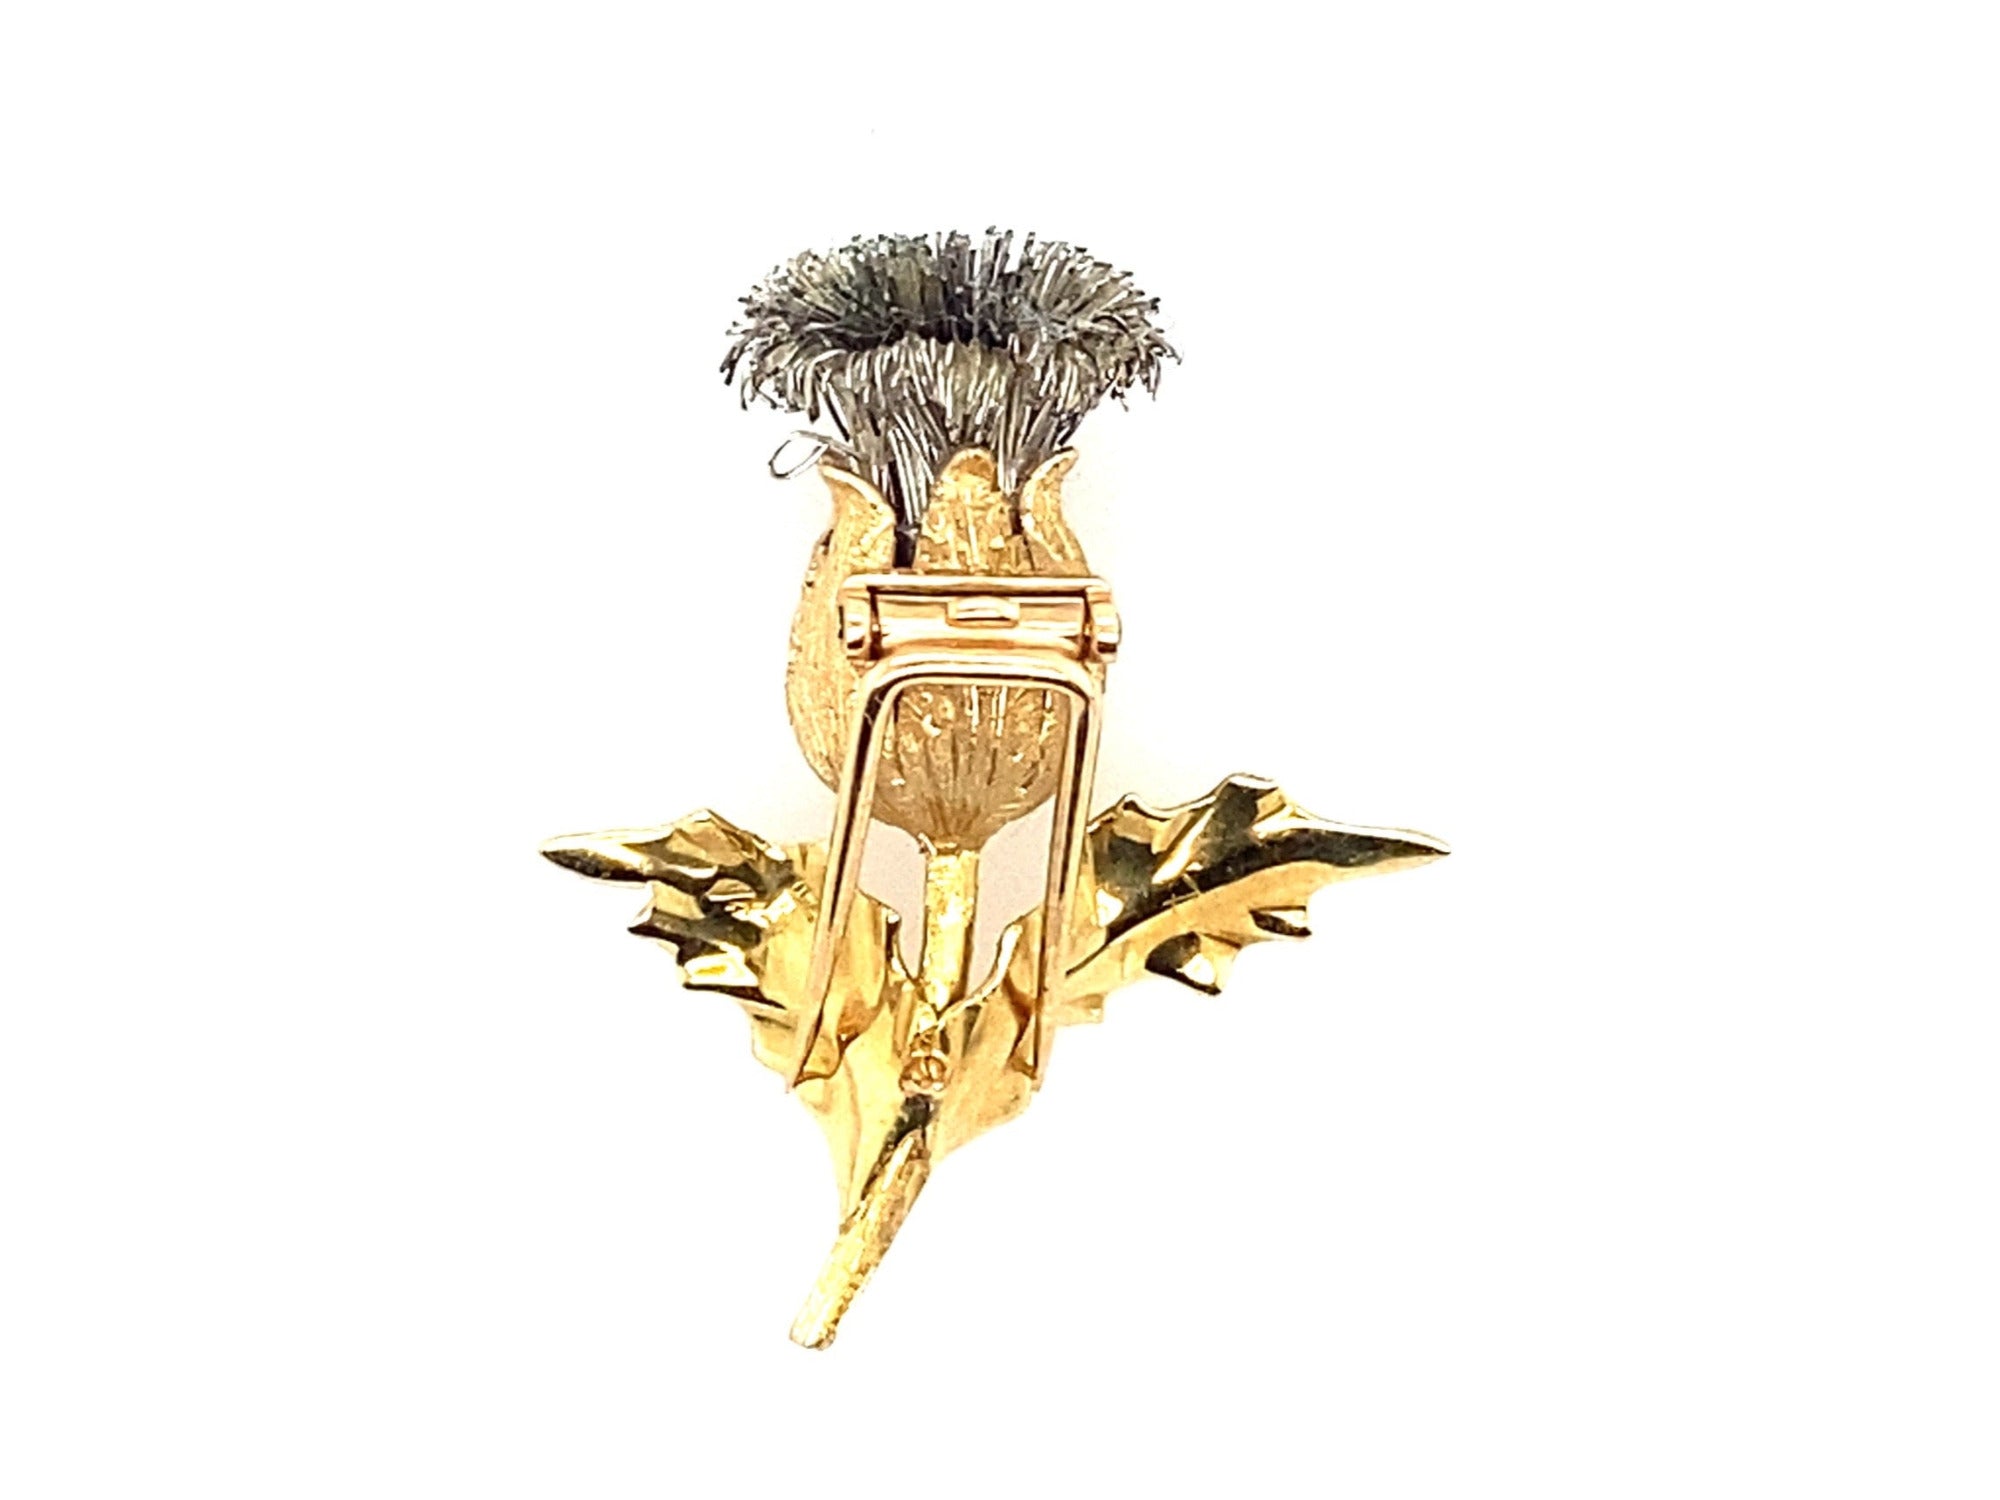 DSF Antique Jewelry Buccellati Gold Silver Thistle Flower Brooch Pin